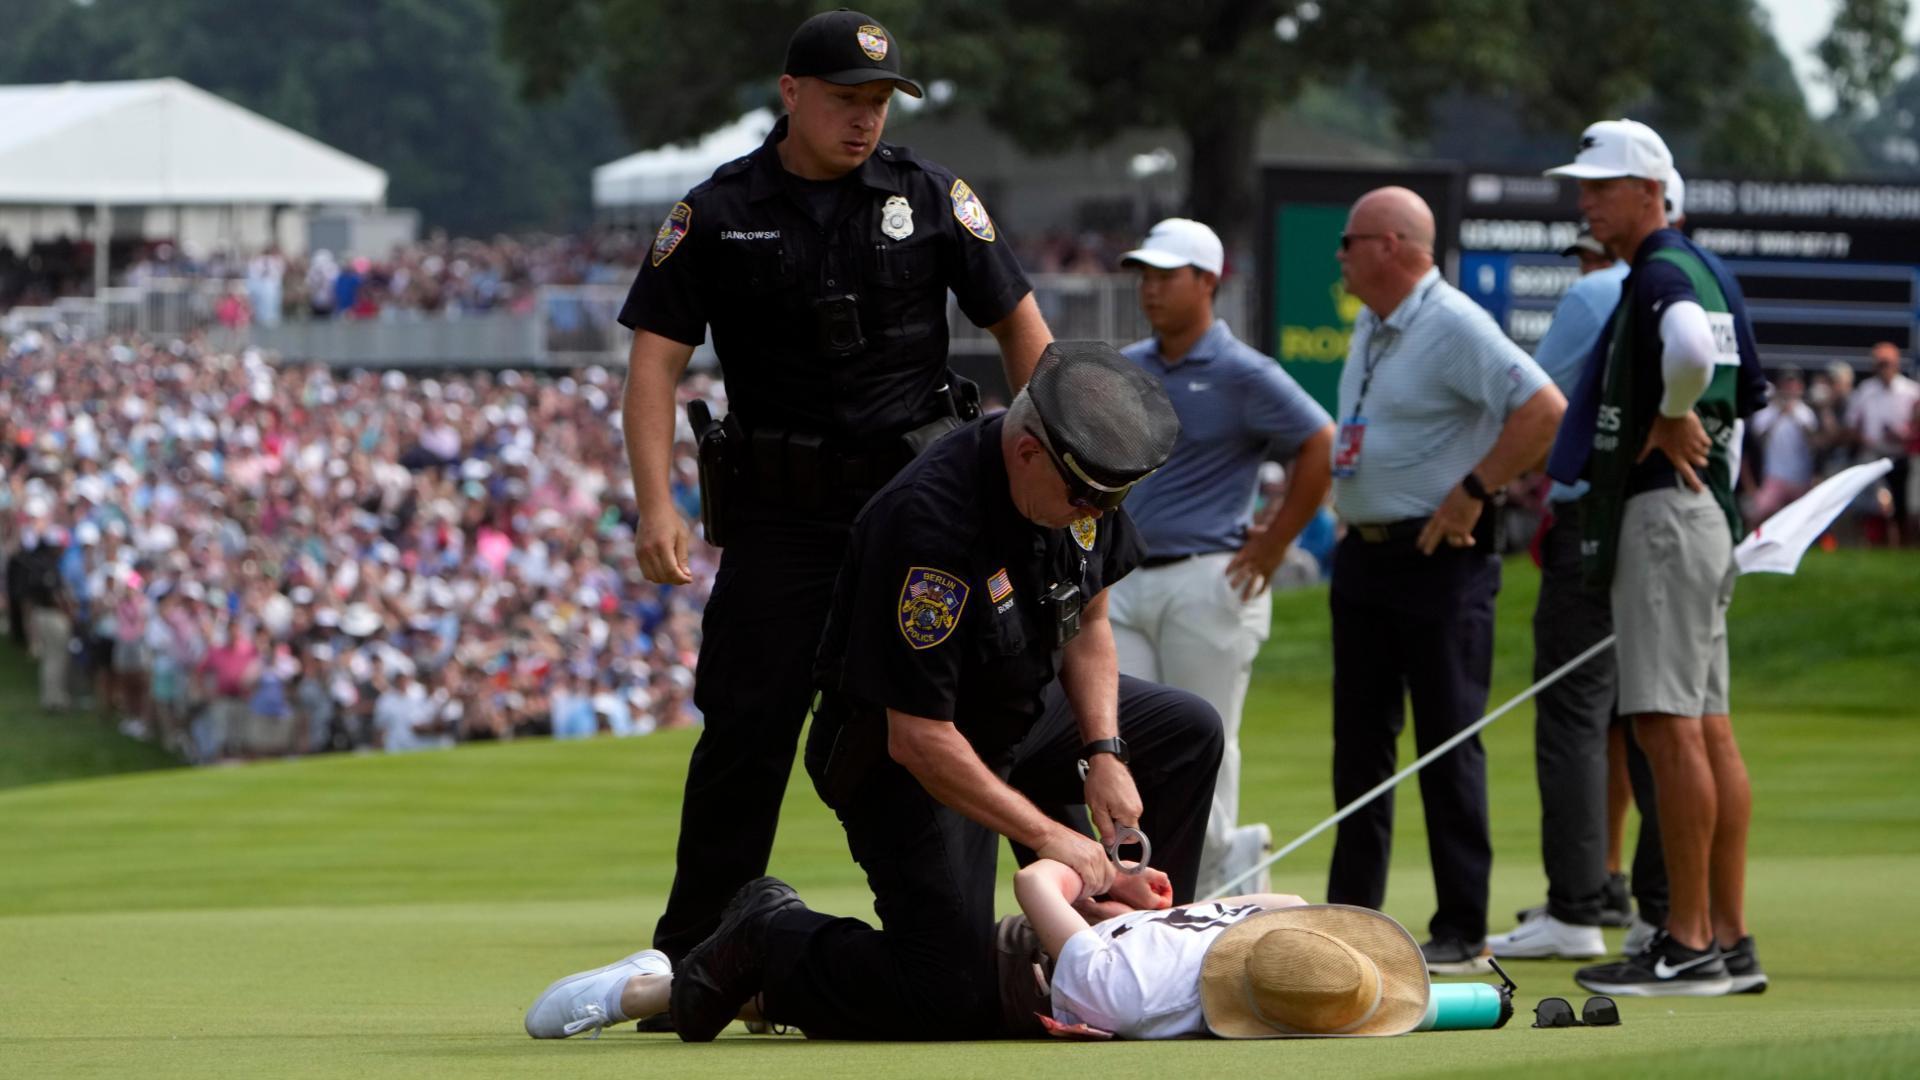 Protesters arrested after invading 18th green at Travelers